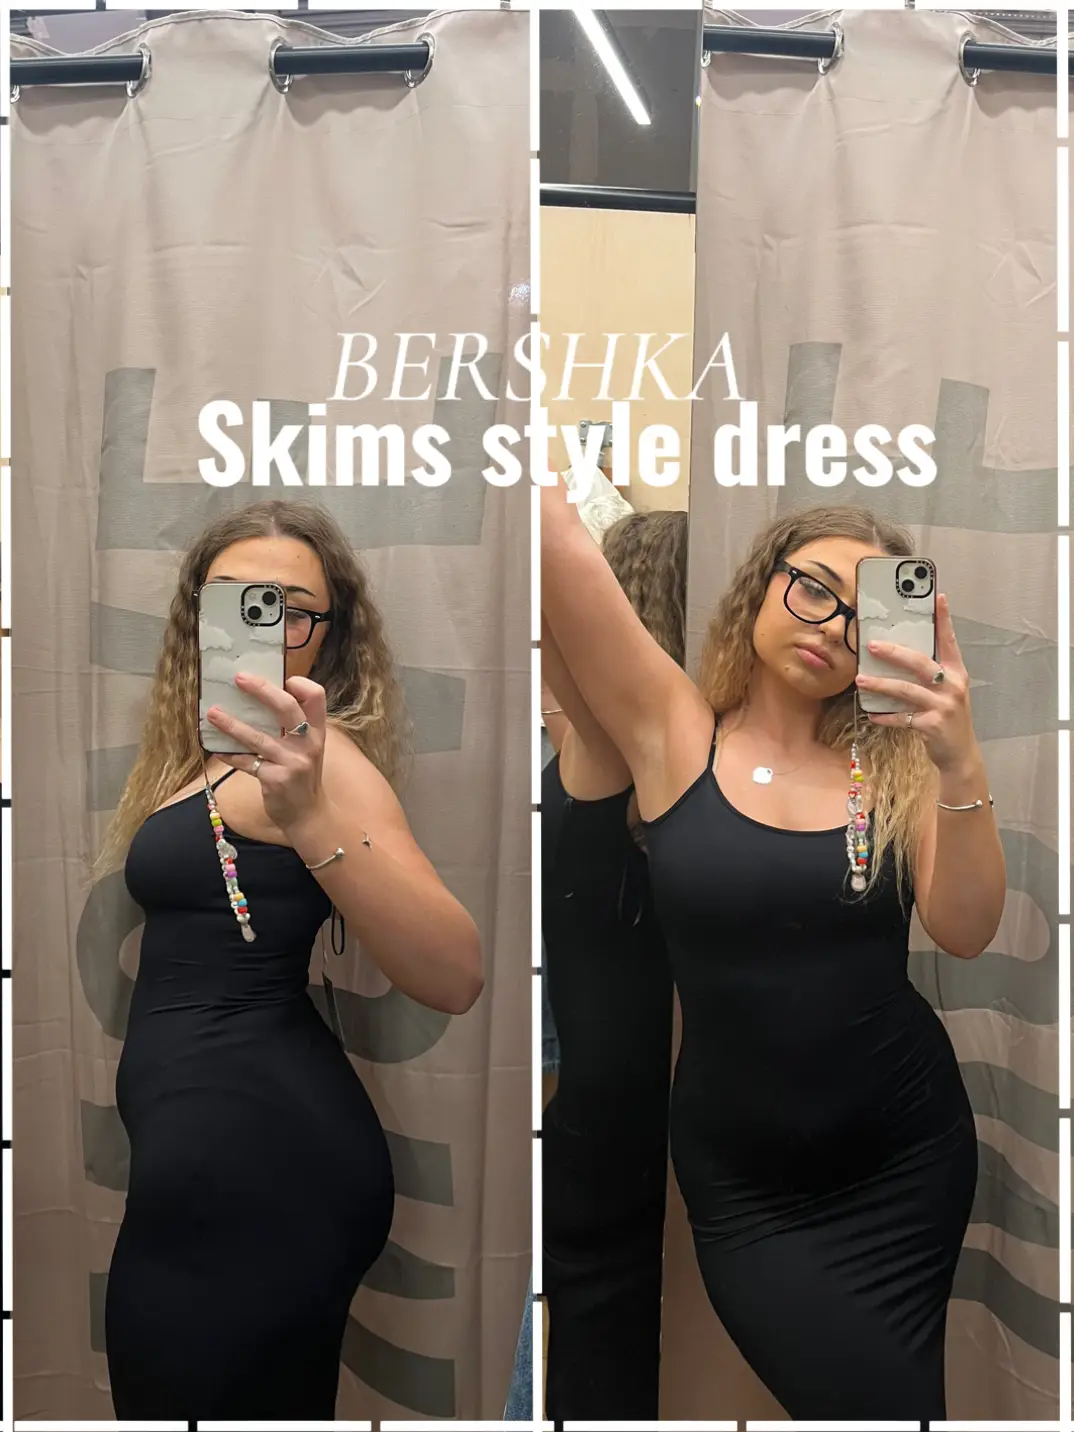 Skims style dress from Bershka, Gallery posted by Nati